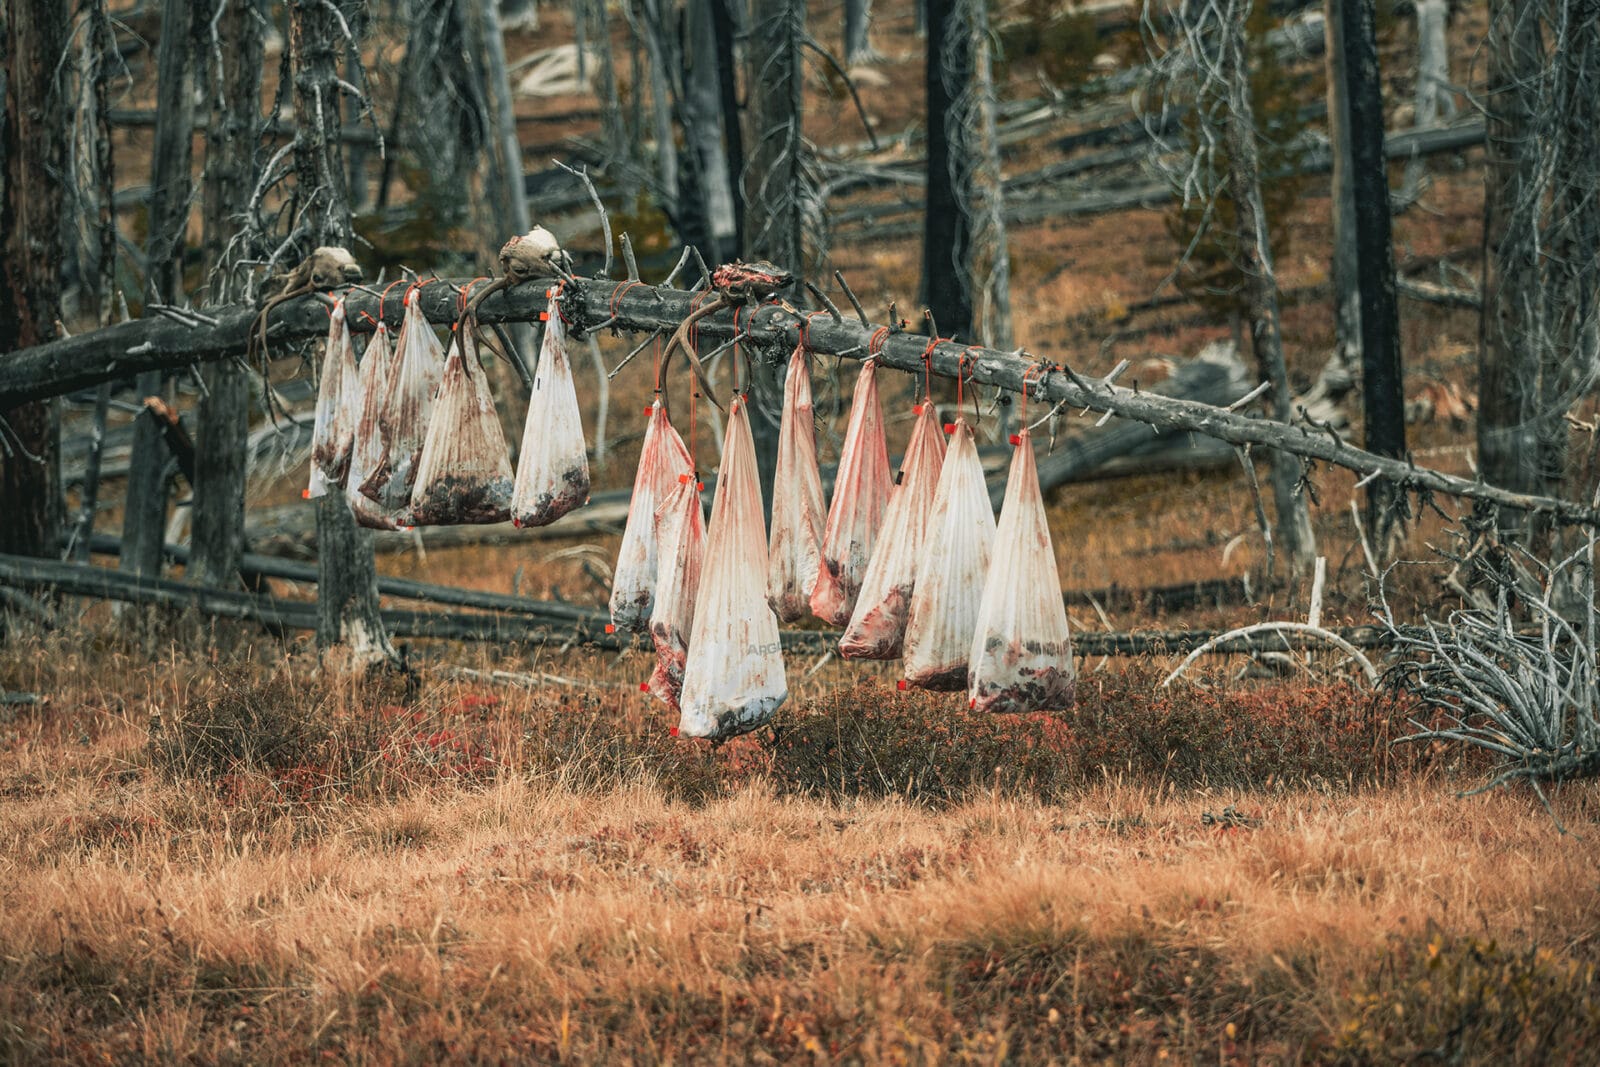 13 game bags filled with wild game meat hang from a dead tree limb in a burn area.